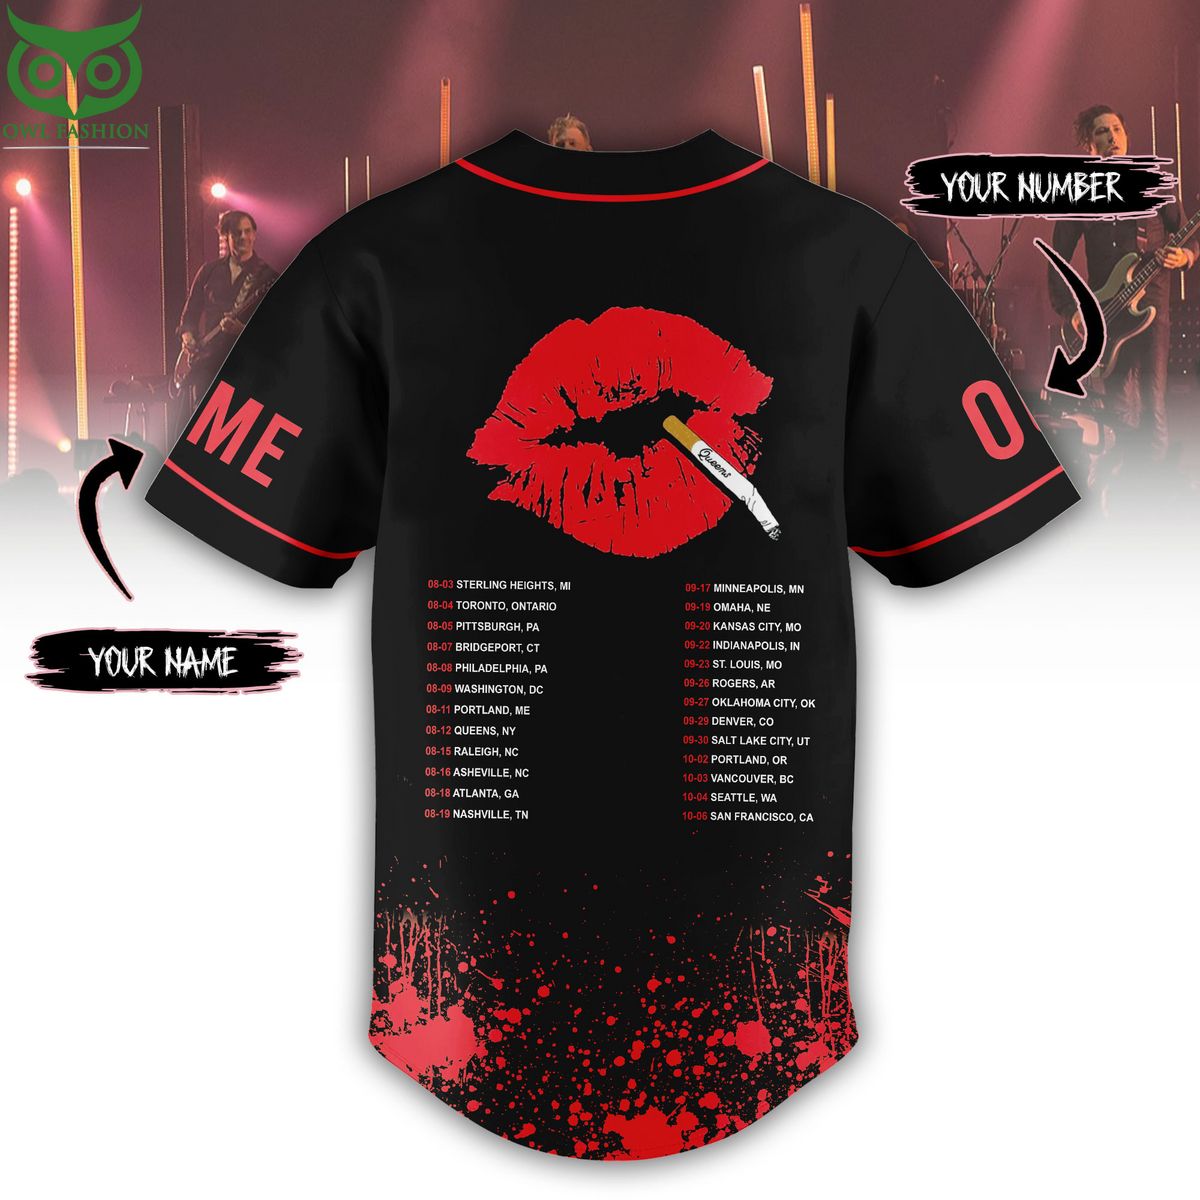 custom name number queens of the stone age rock baseball jersey 3 4YcGn.jpg